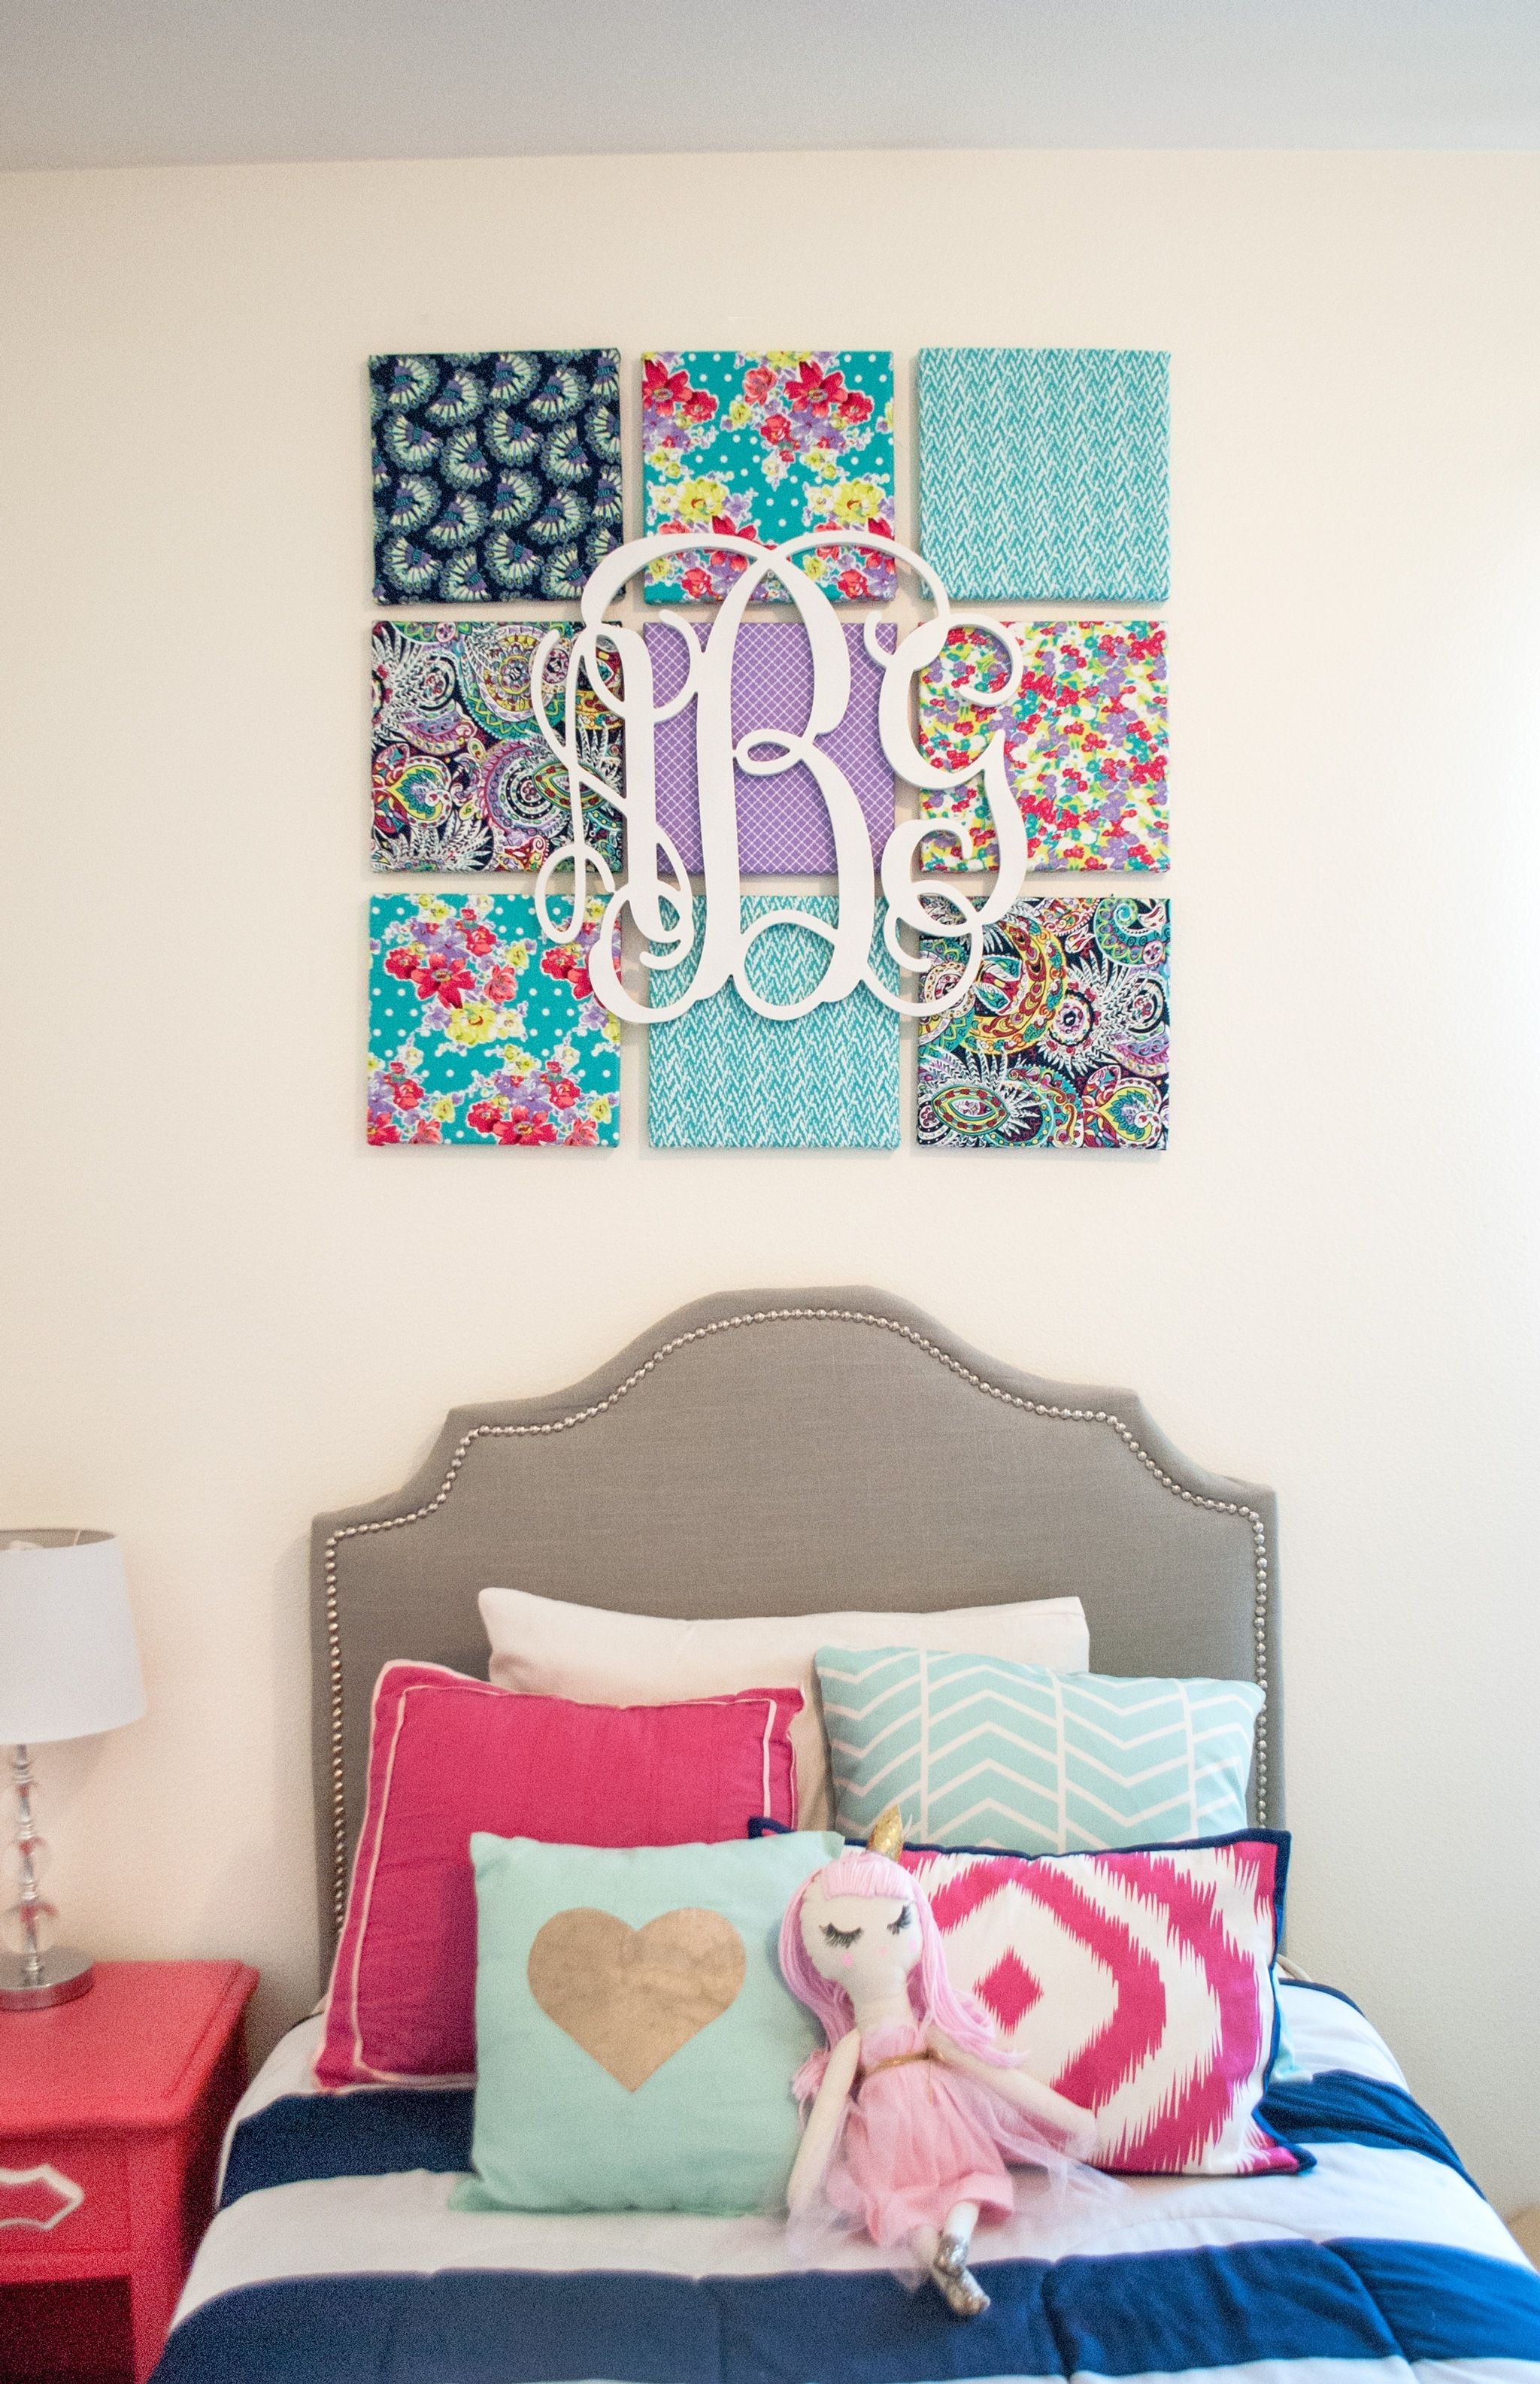 Diy Canvas Art Marvelous Diy Canvas Wall Art – Home Design And Wall Intended For Diy Canvas Wall Art (View 10 of 20)